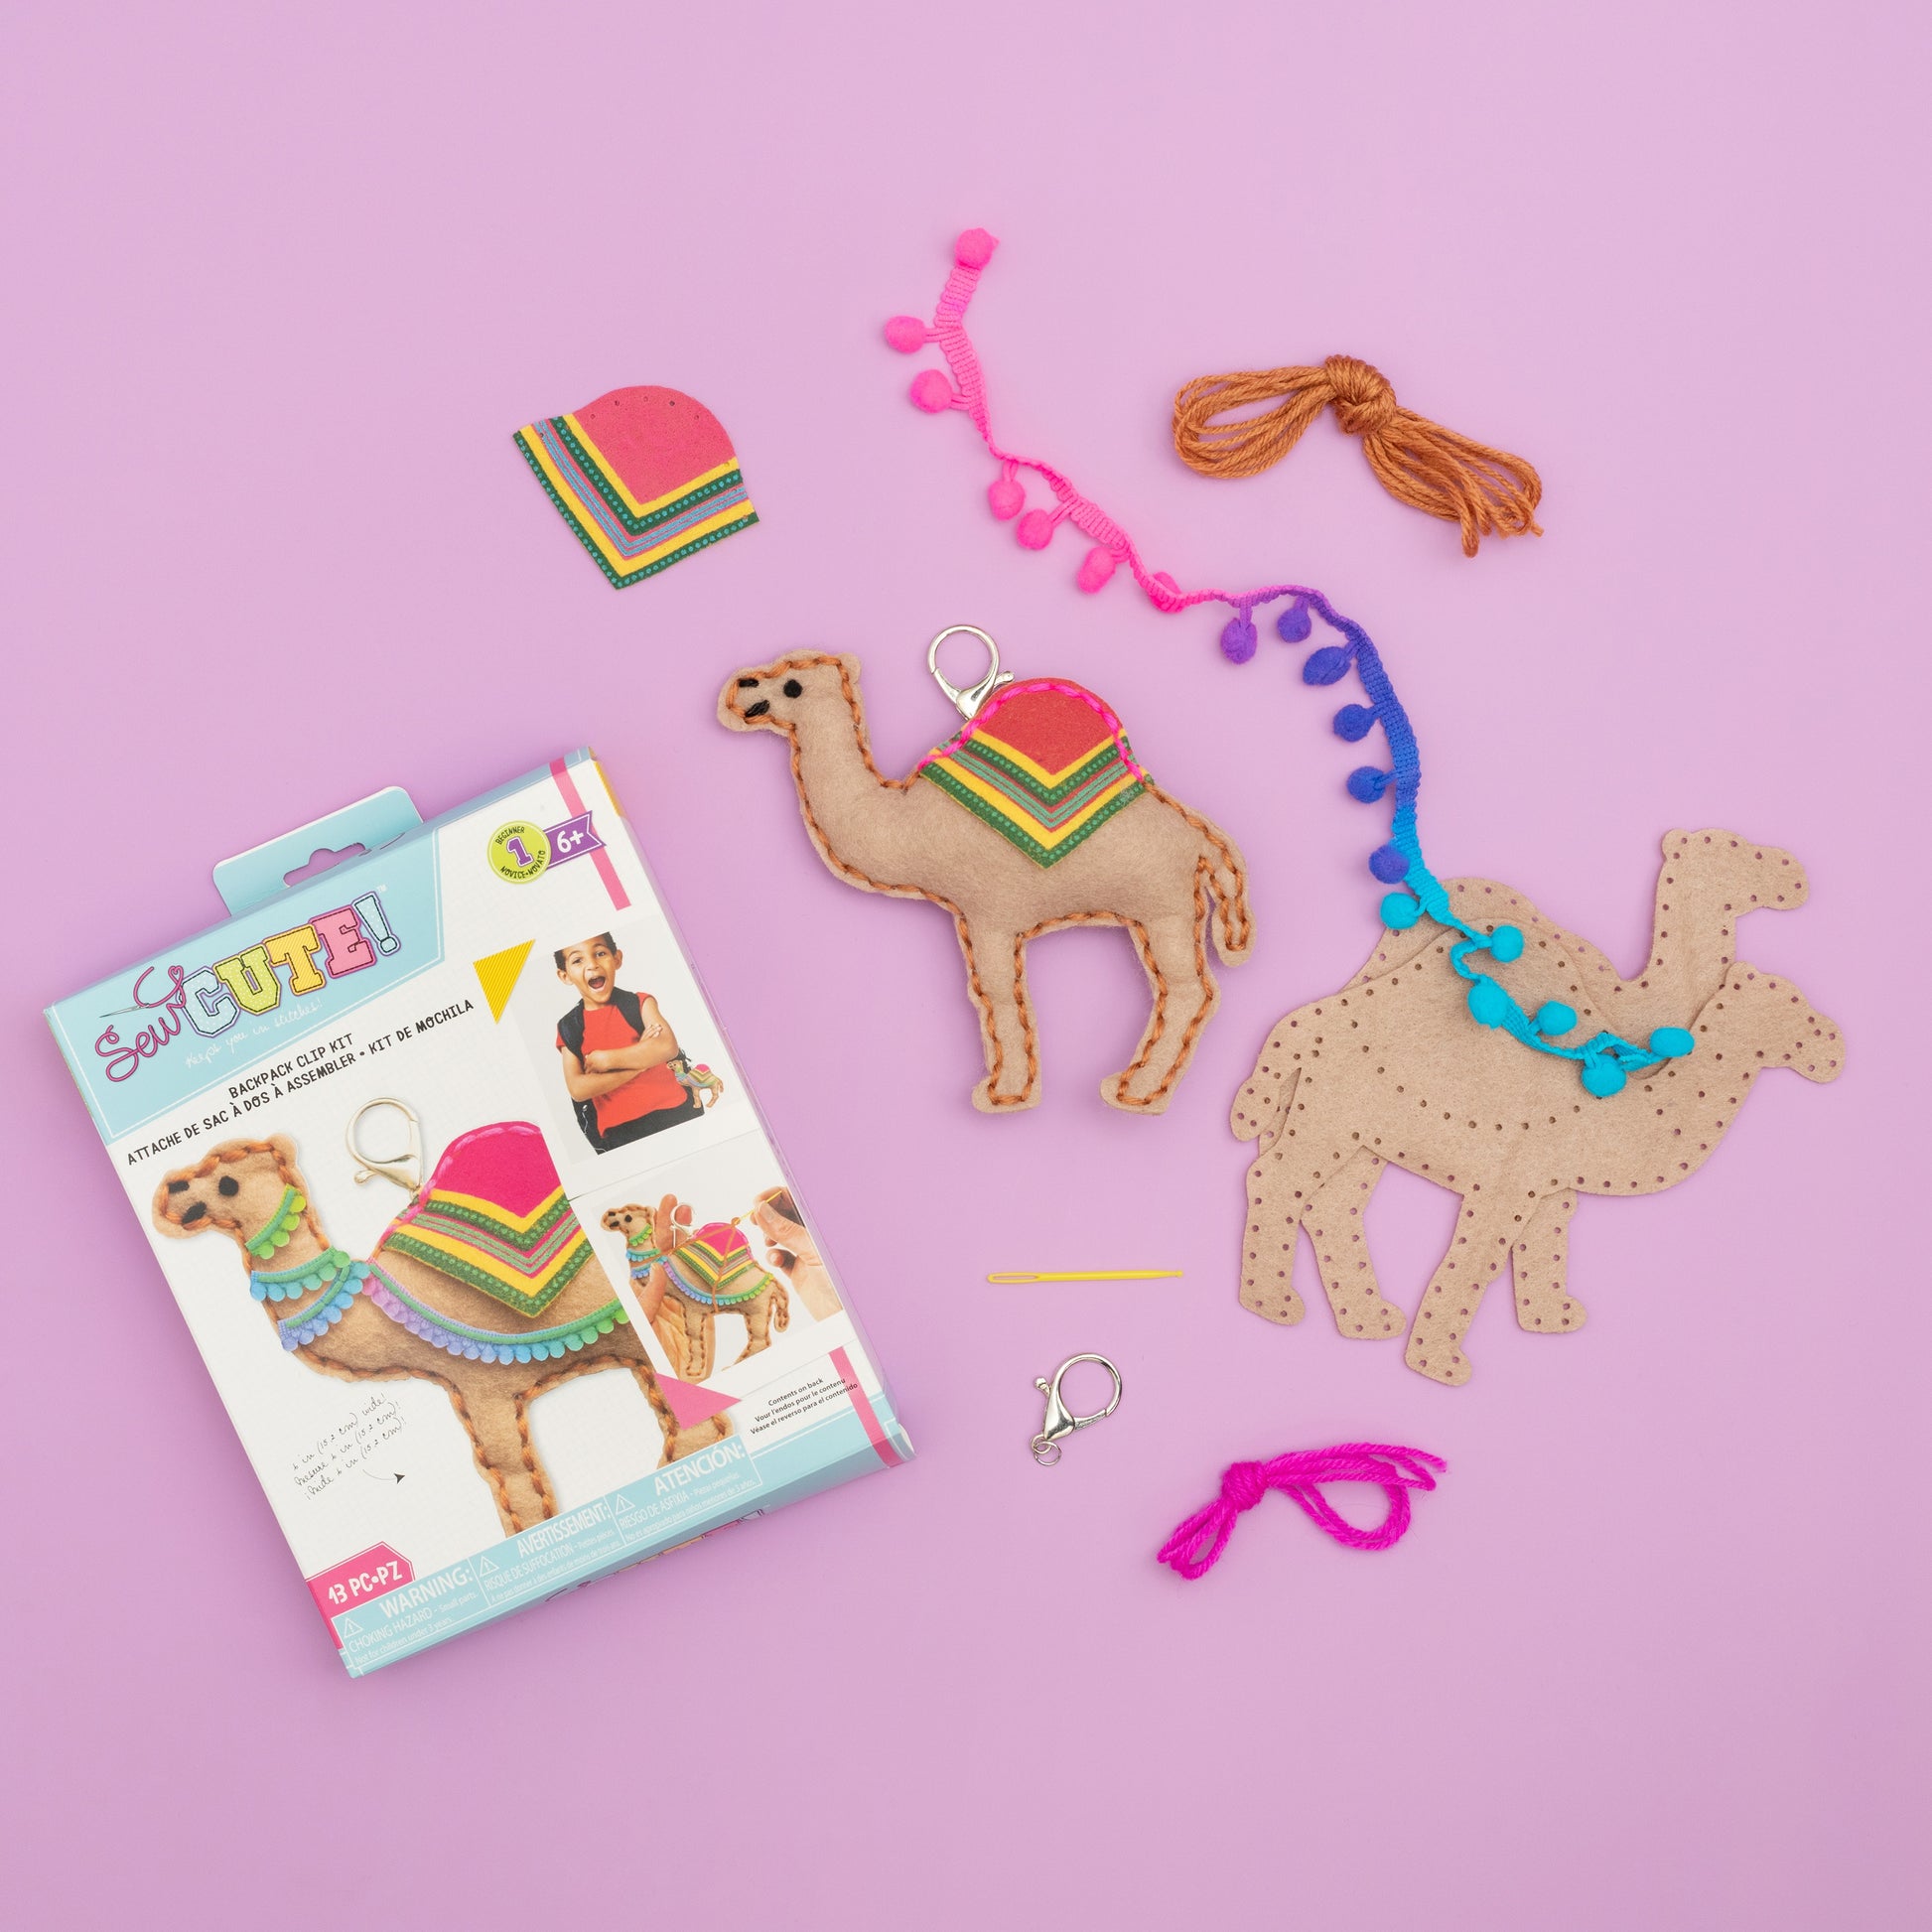 Sewing Café - We sew toys